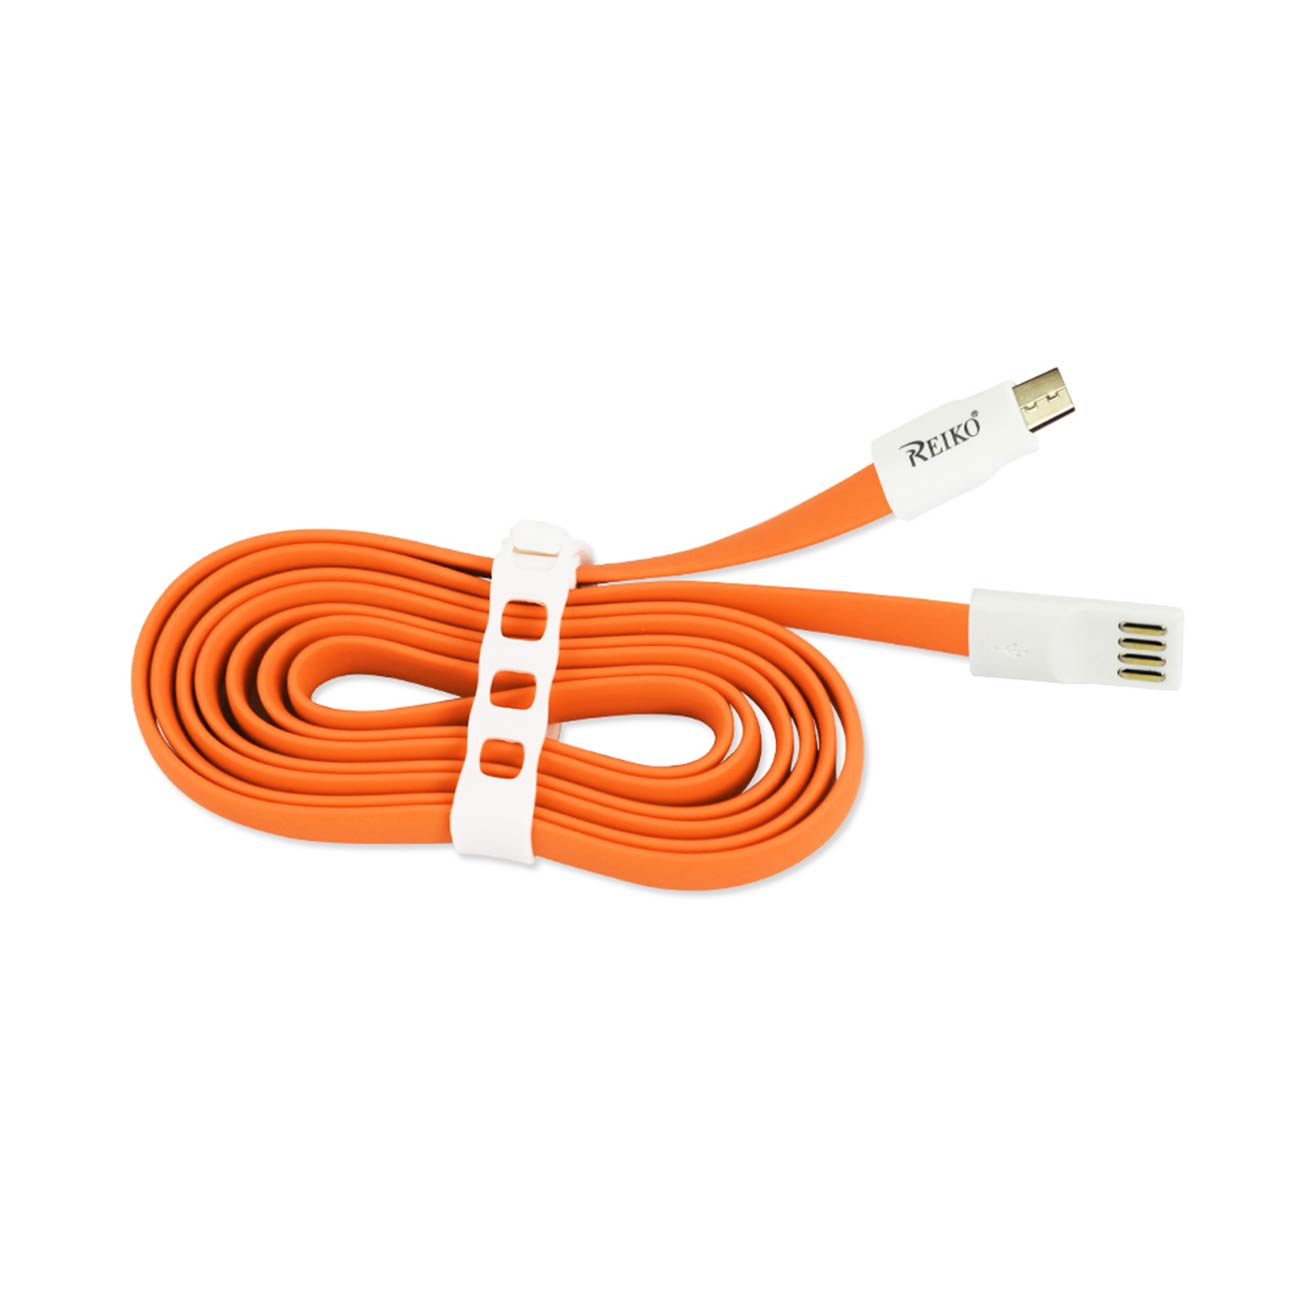 Data Cable USB Flat Micro Gold Plated 3.9Ft With Cable Tie Orange Color